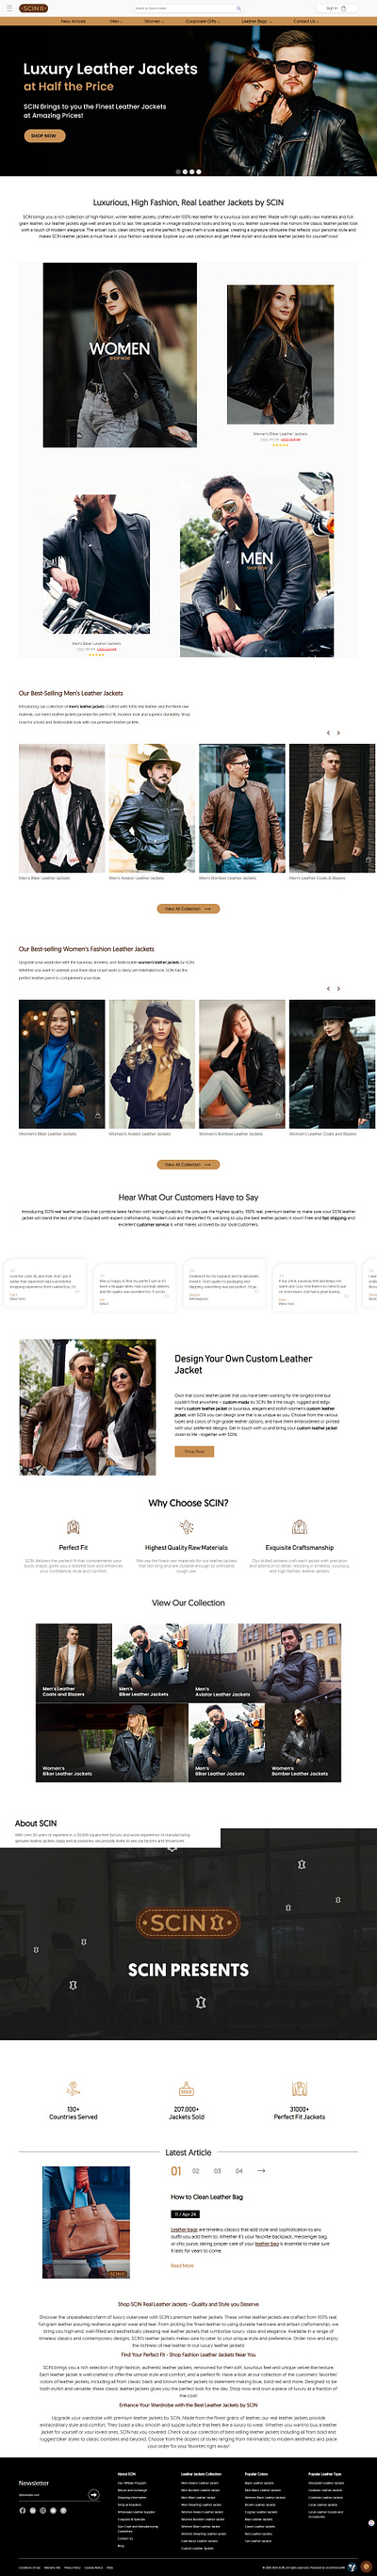 Leather Apparel Store - eCommerce